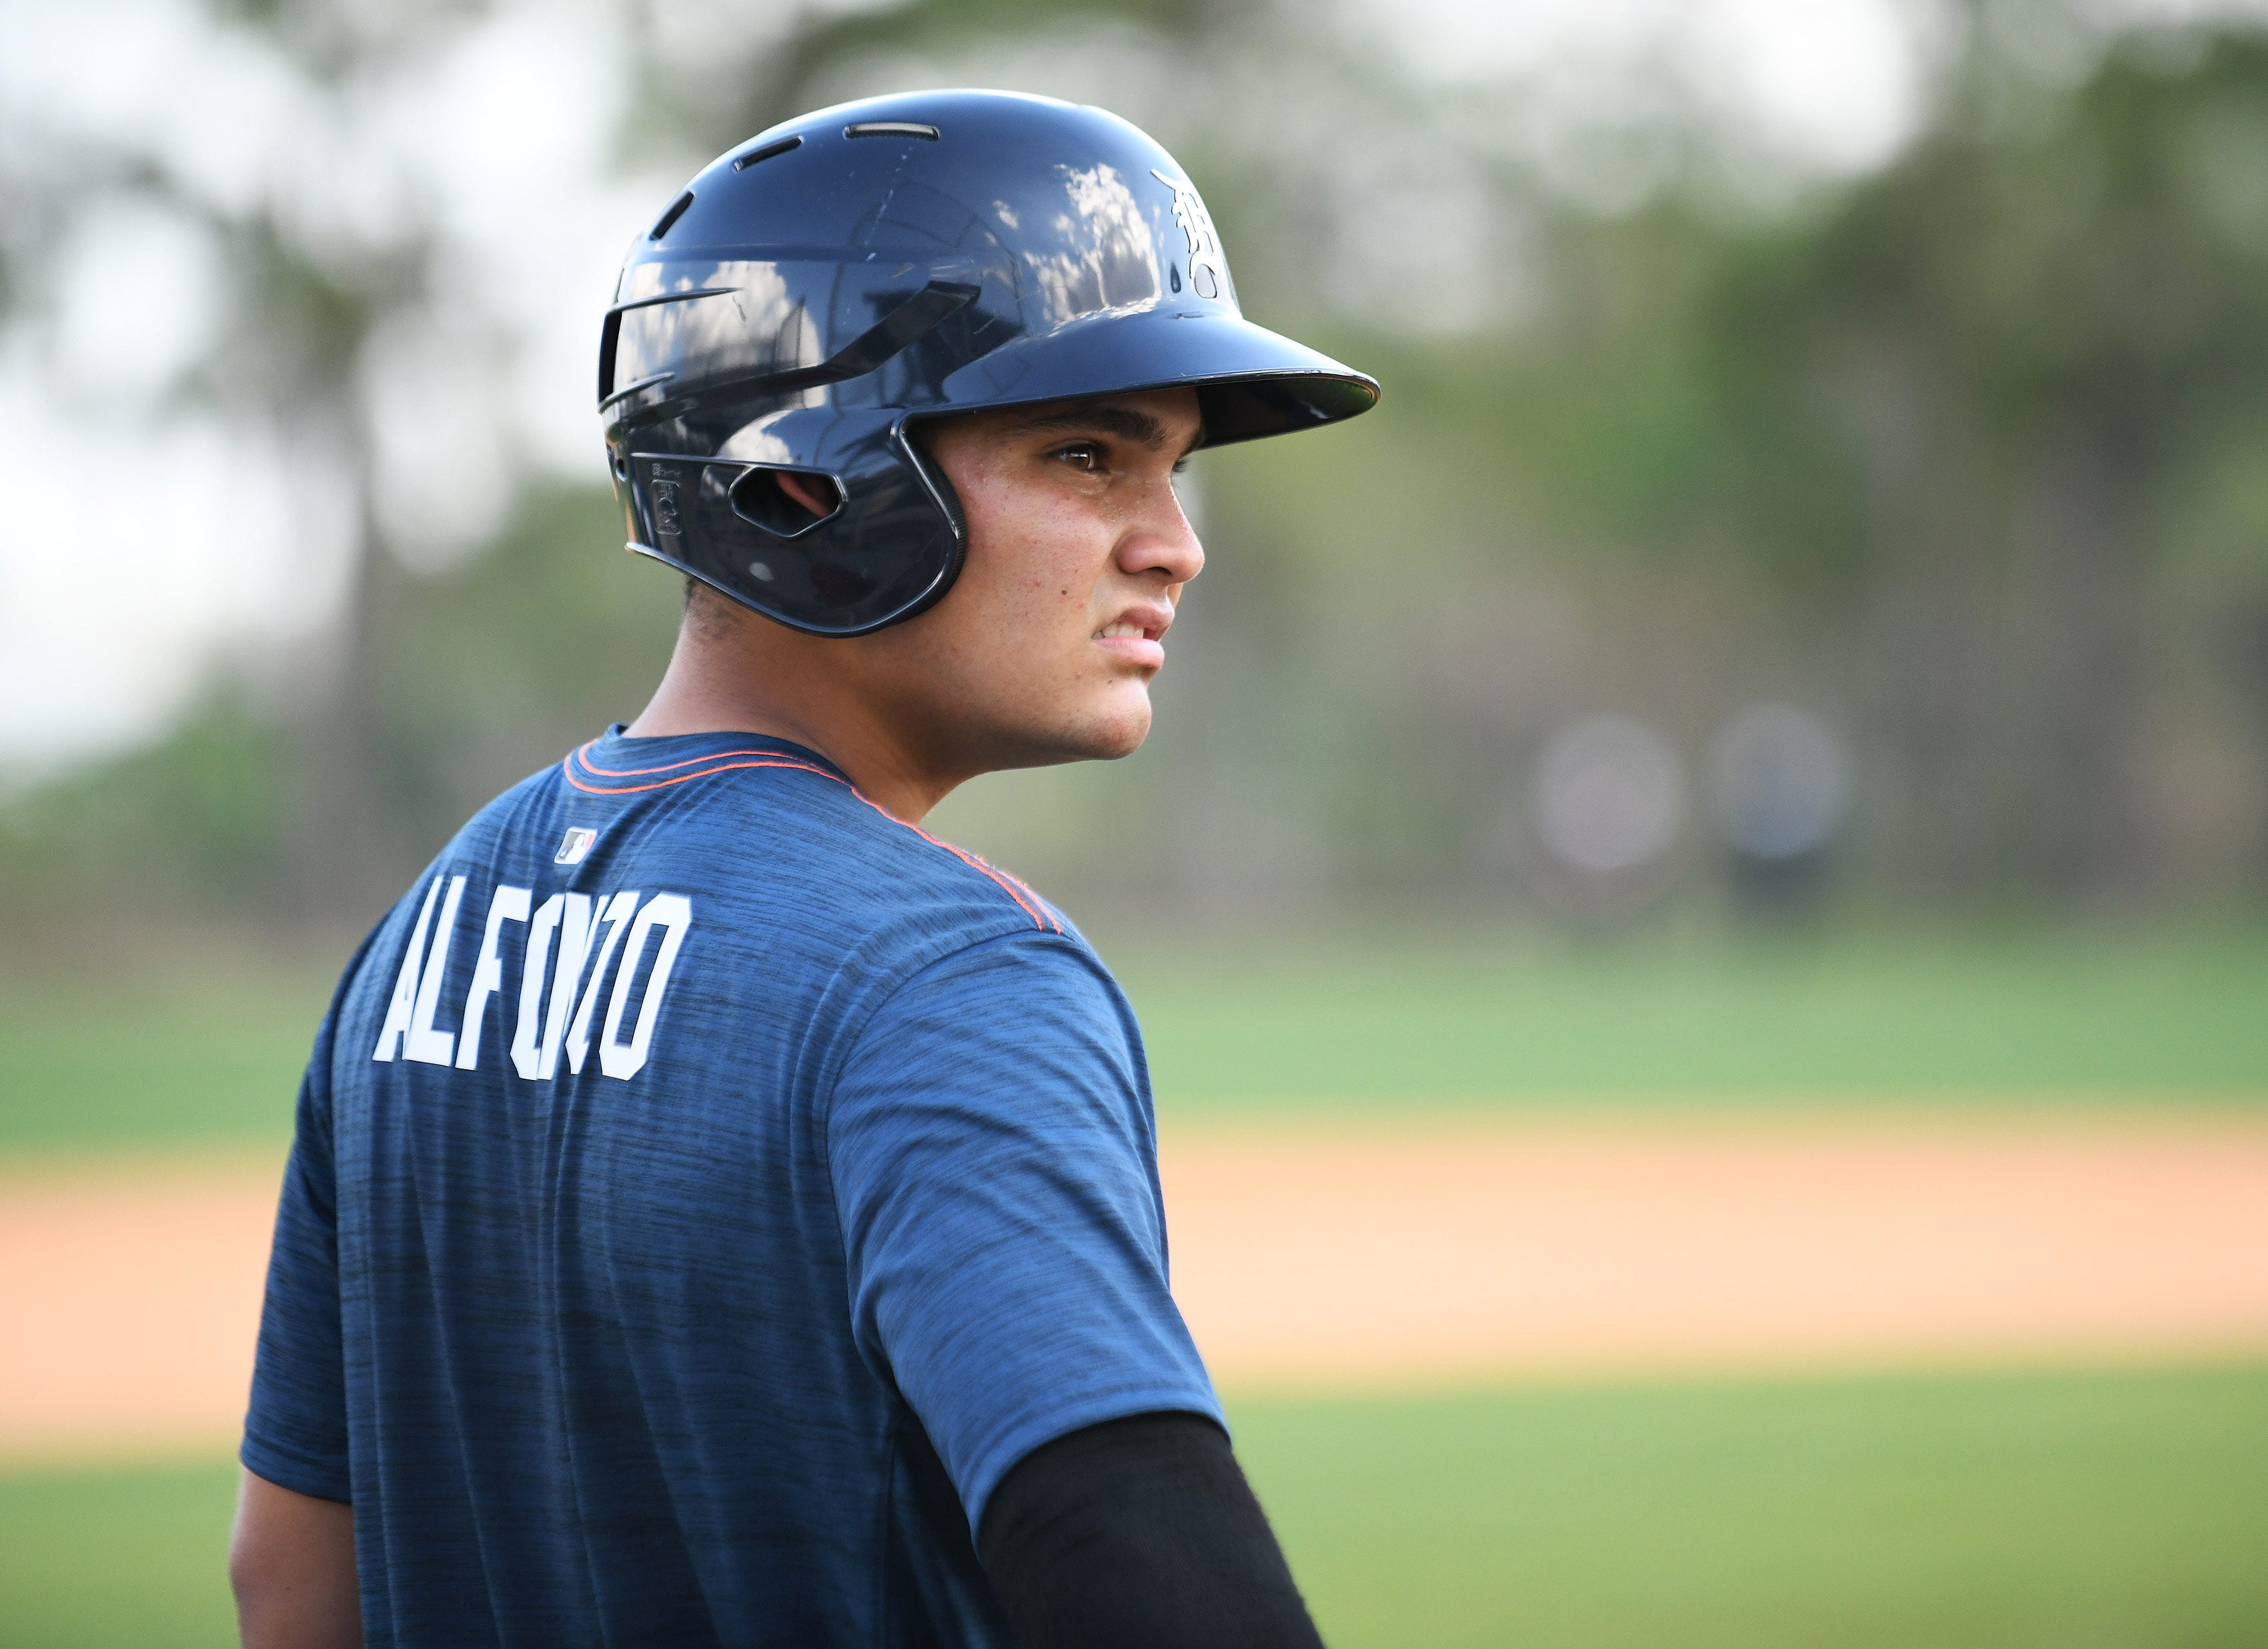 16. Eliezer Alfonzo, 20, 5-10, 155, C: He’s a switch-hitter and perhaps not stout enough to be an everyday catcher in the big leagues. But a guy named Pudge Rodriguez – no, this is not a comparison – was an inch shorter than Alfonzo and had no serious issues while filling out. Alfonzo is a native Venezuelan who has hit just about everywhere, including during a 48-game stint last summer at Single-A Connecticut: .318 batting average, with a .342 on-base percentage. This, it should be noted, was while he was still 19. The Tigers will back-slap any young catching prospect who appears a good bet to someday see Comerica Park. Alfonzo might qualify.